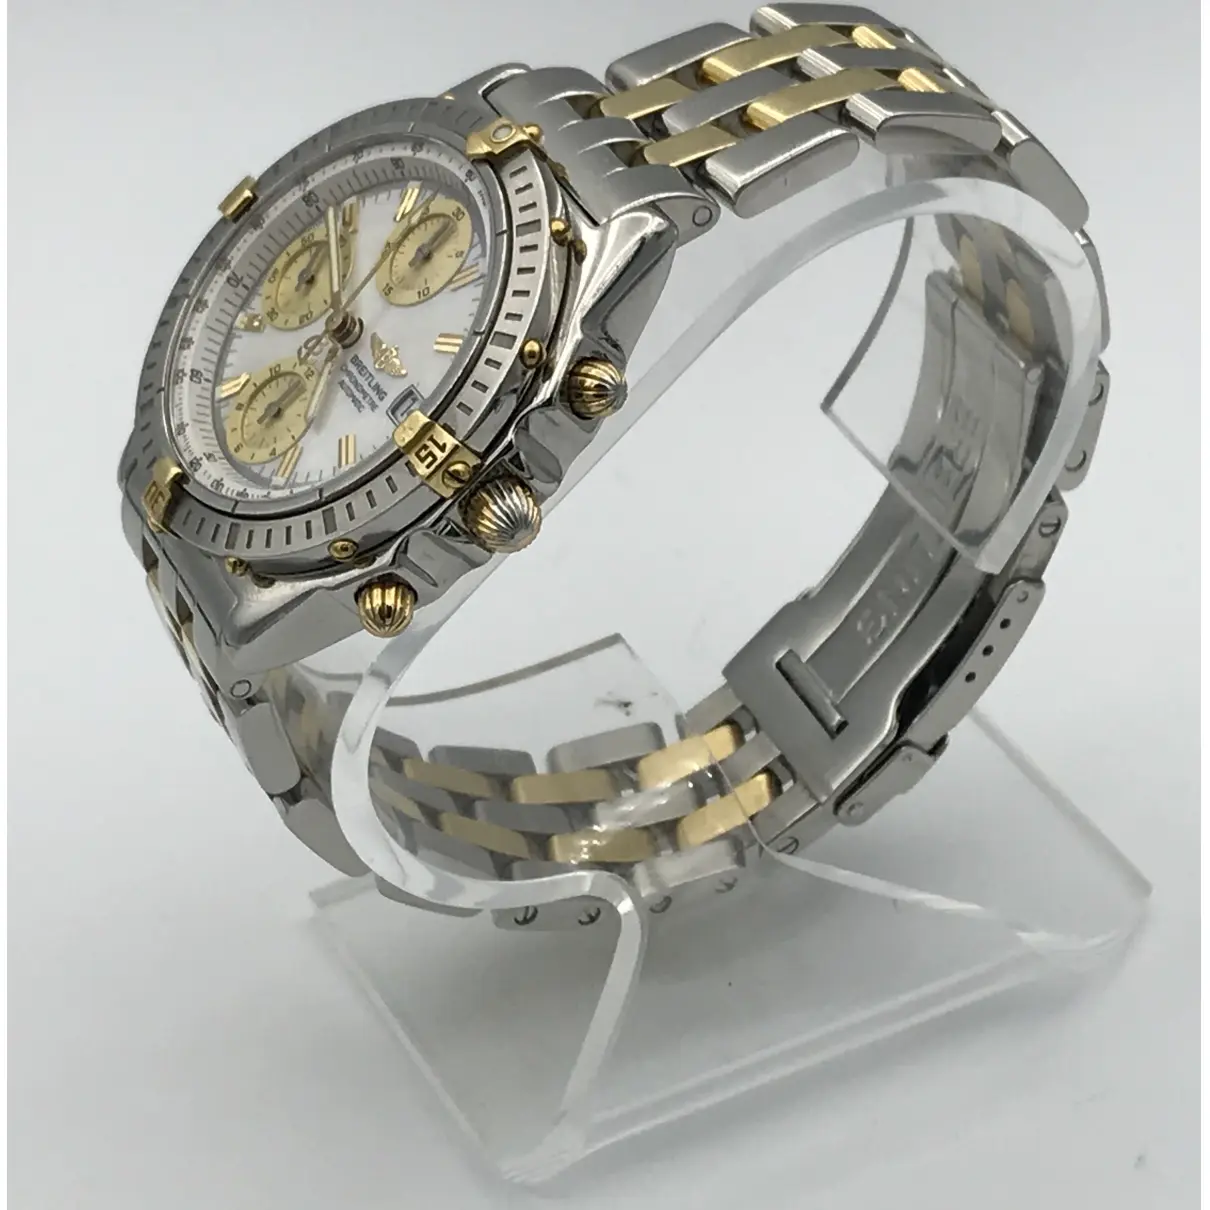 Breitling Chronomat watch for sale